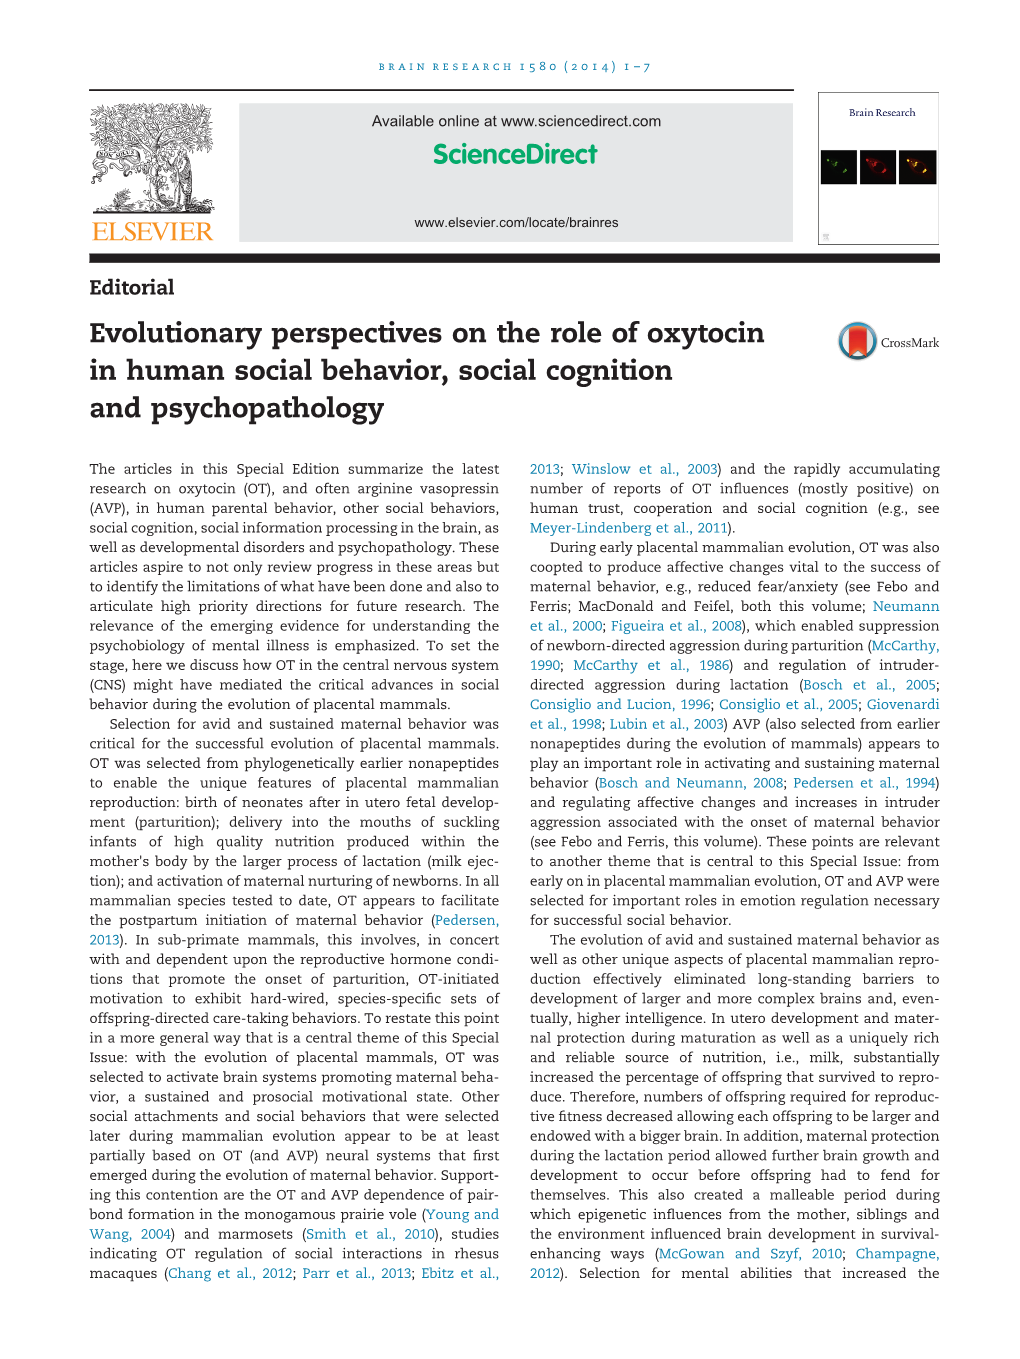 Evolutionary Perspectives on the Role of Oxytocin in Human Social Behavior, Social Cognition and Psychopathology